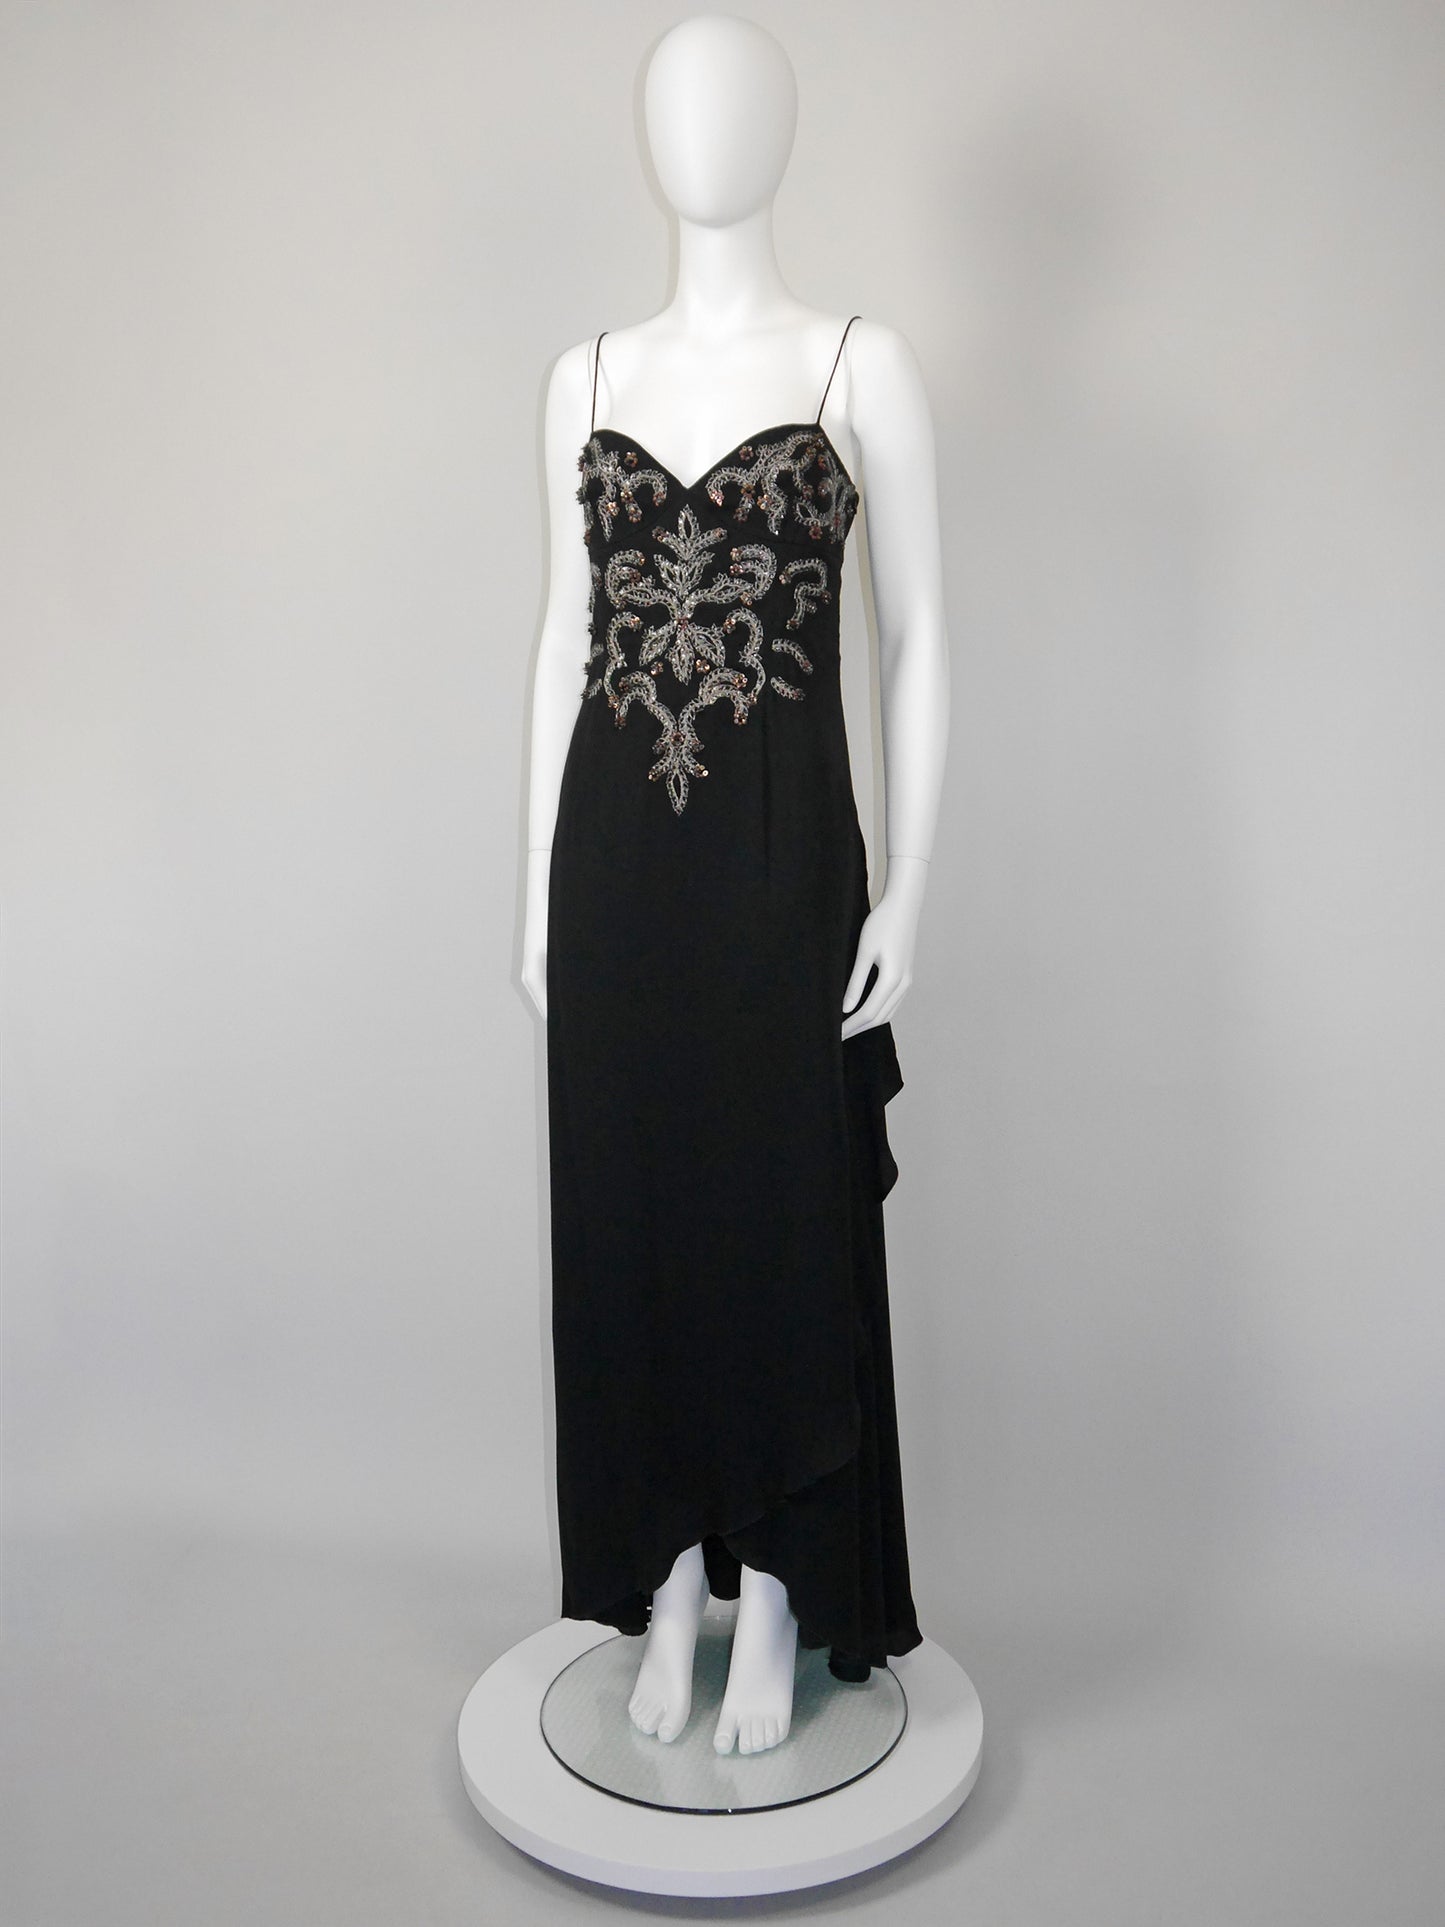 VALENTINO 1990s 2000s Vintage Black Beaded Sequined Maxi Evening Dress Gown Size M-L